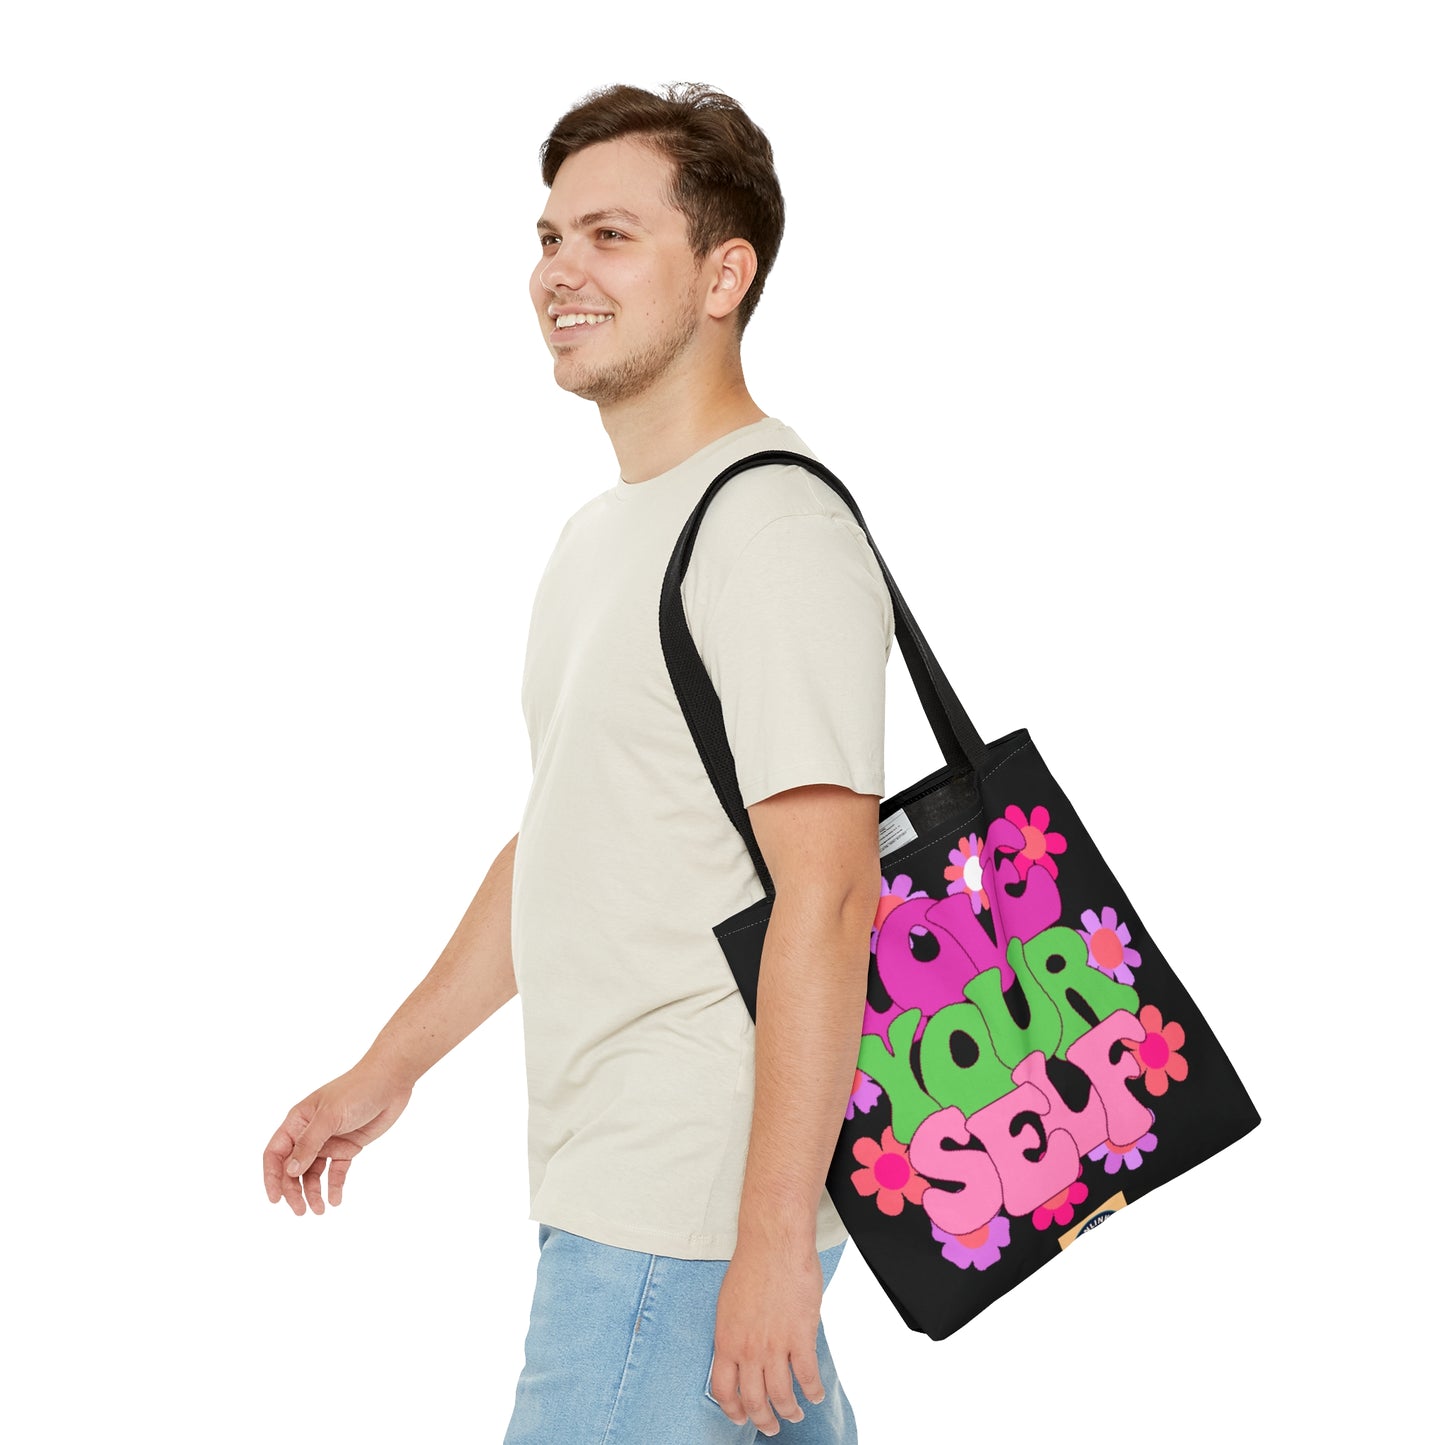 Colorful and bright “LOVE YOURSELF” tote bag. Come in 3 sizes to meet your needs. Reusable for all your shopping or trip needs.